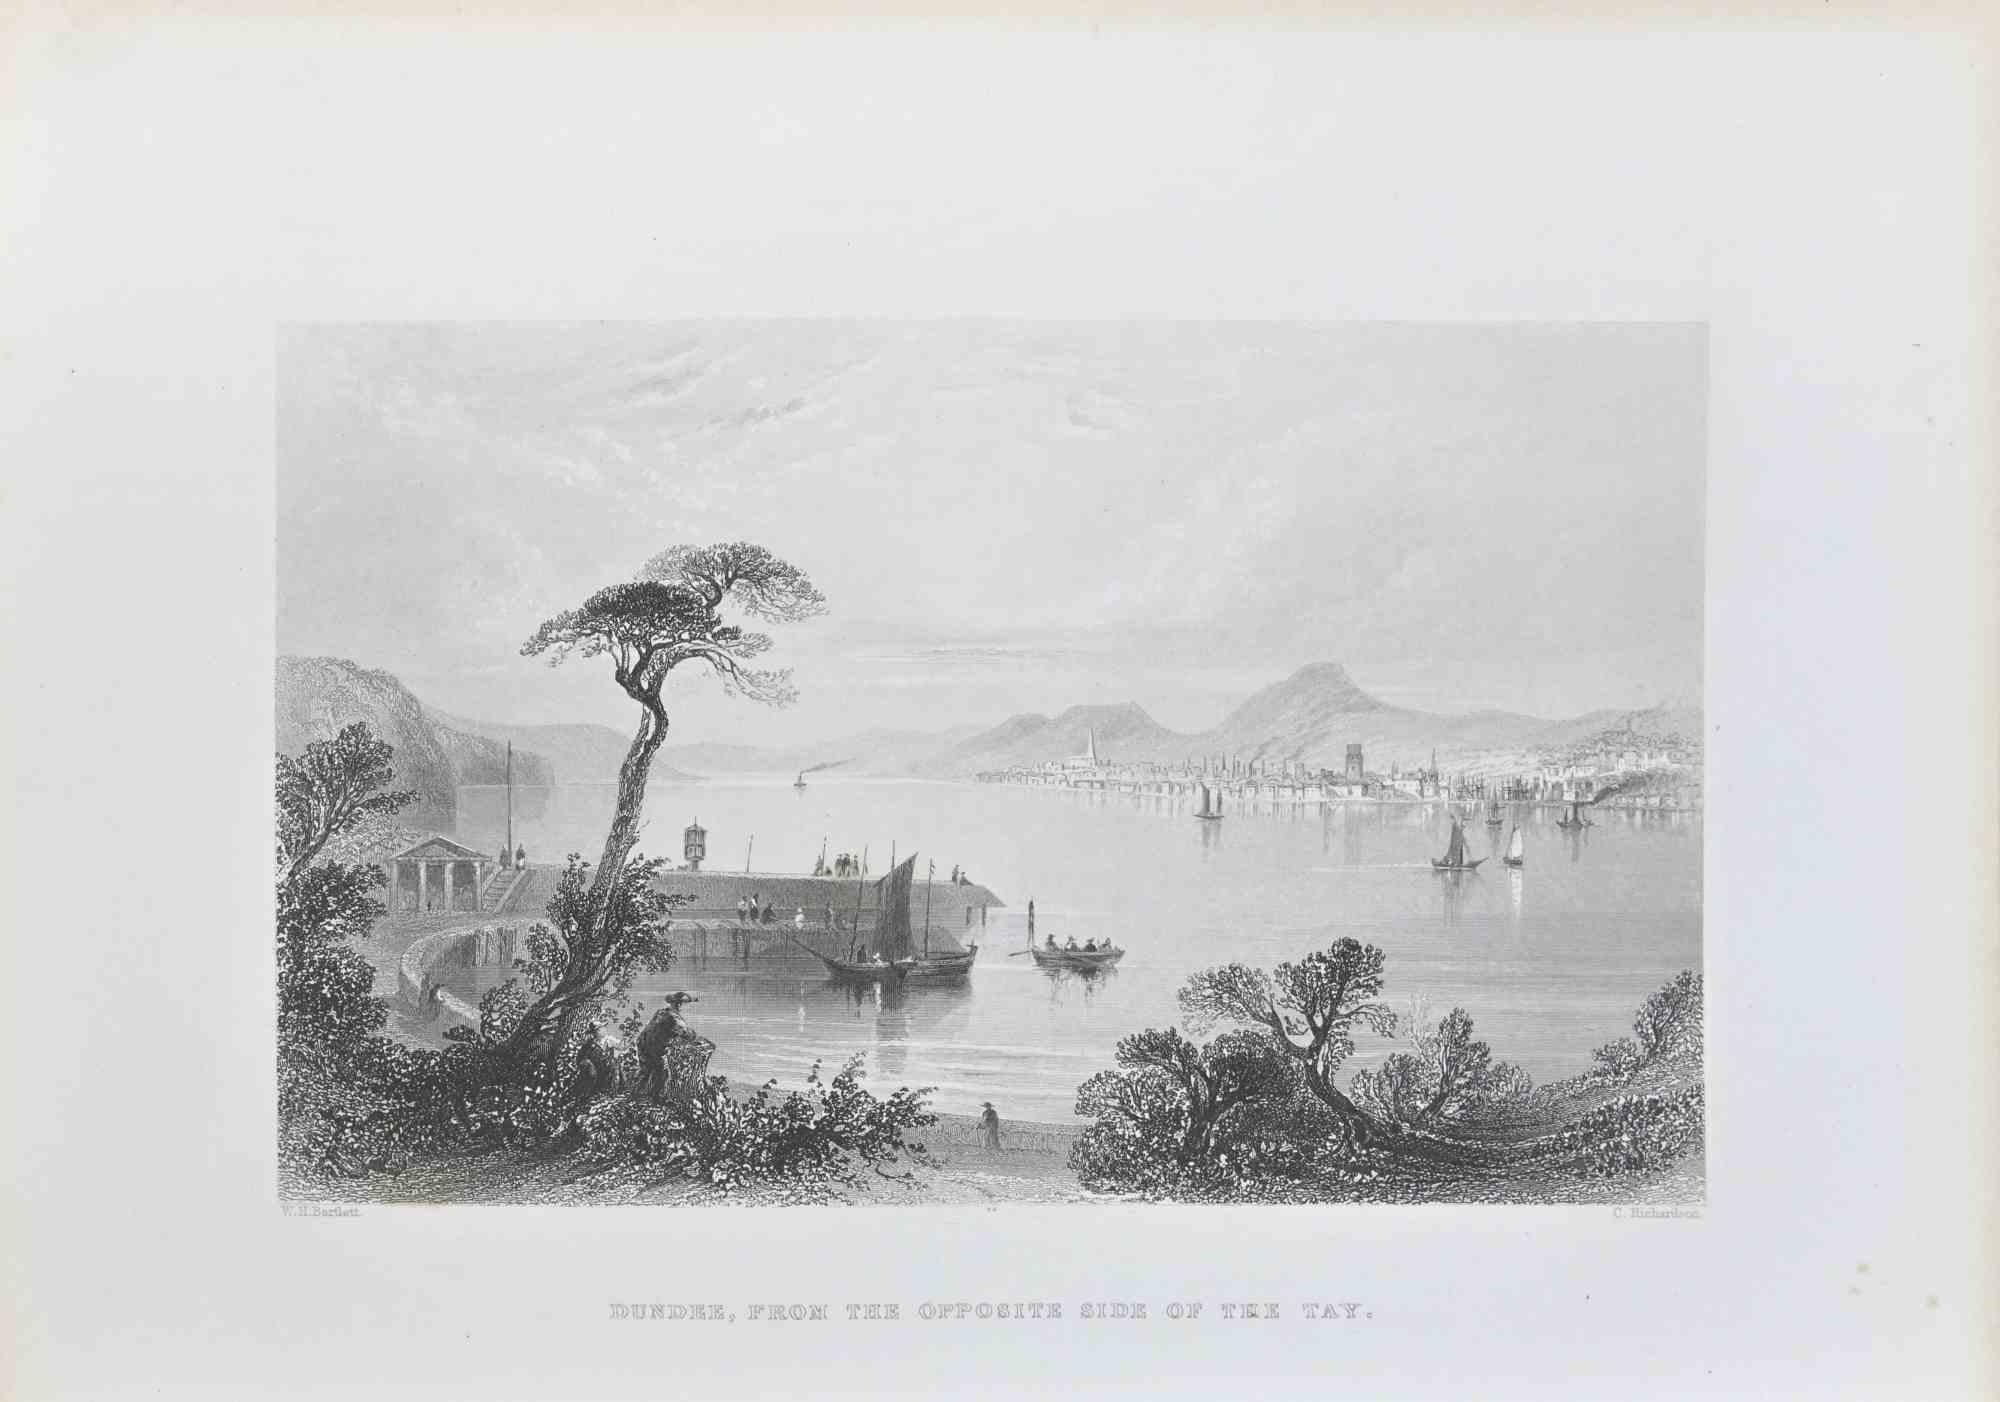 William Henry Bartlett  Landscape Print - Dundee, from the Opposite Side of the Tay By W.H. Bartlett - 19th Century